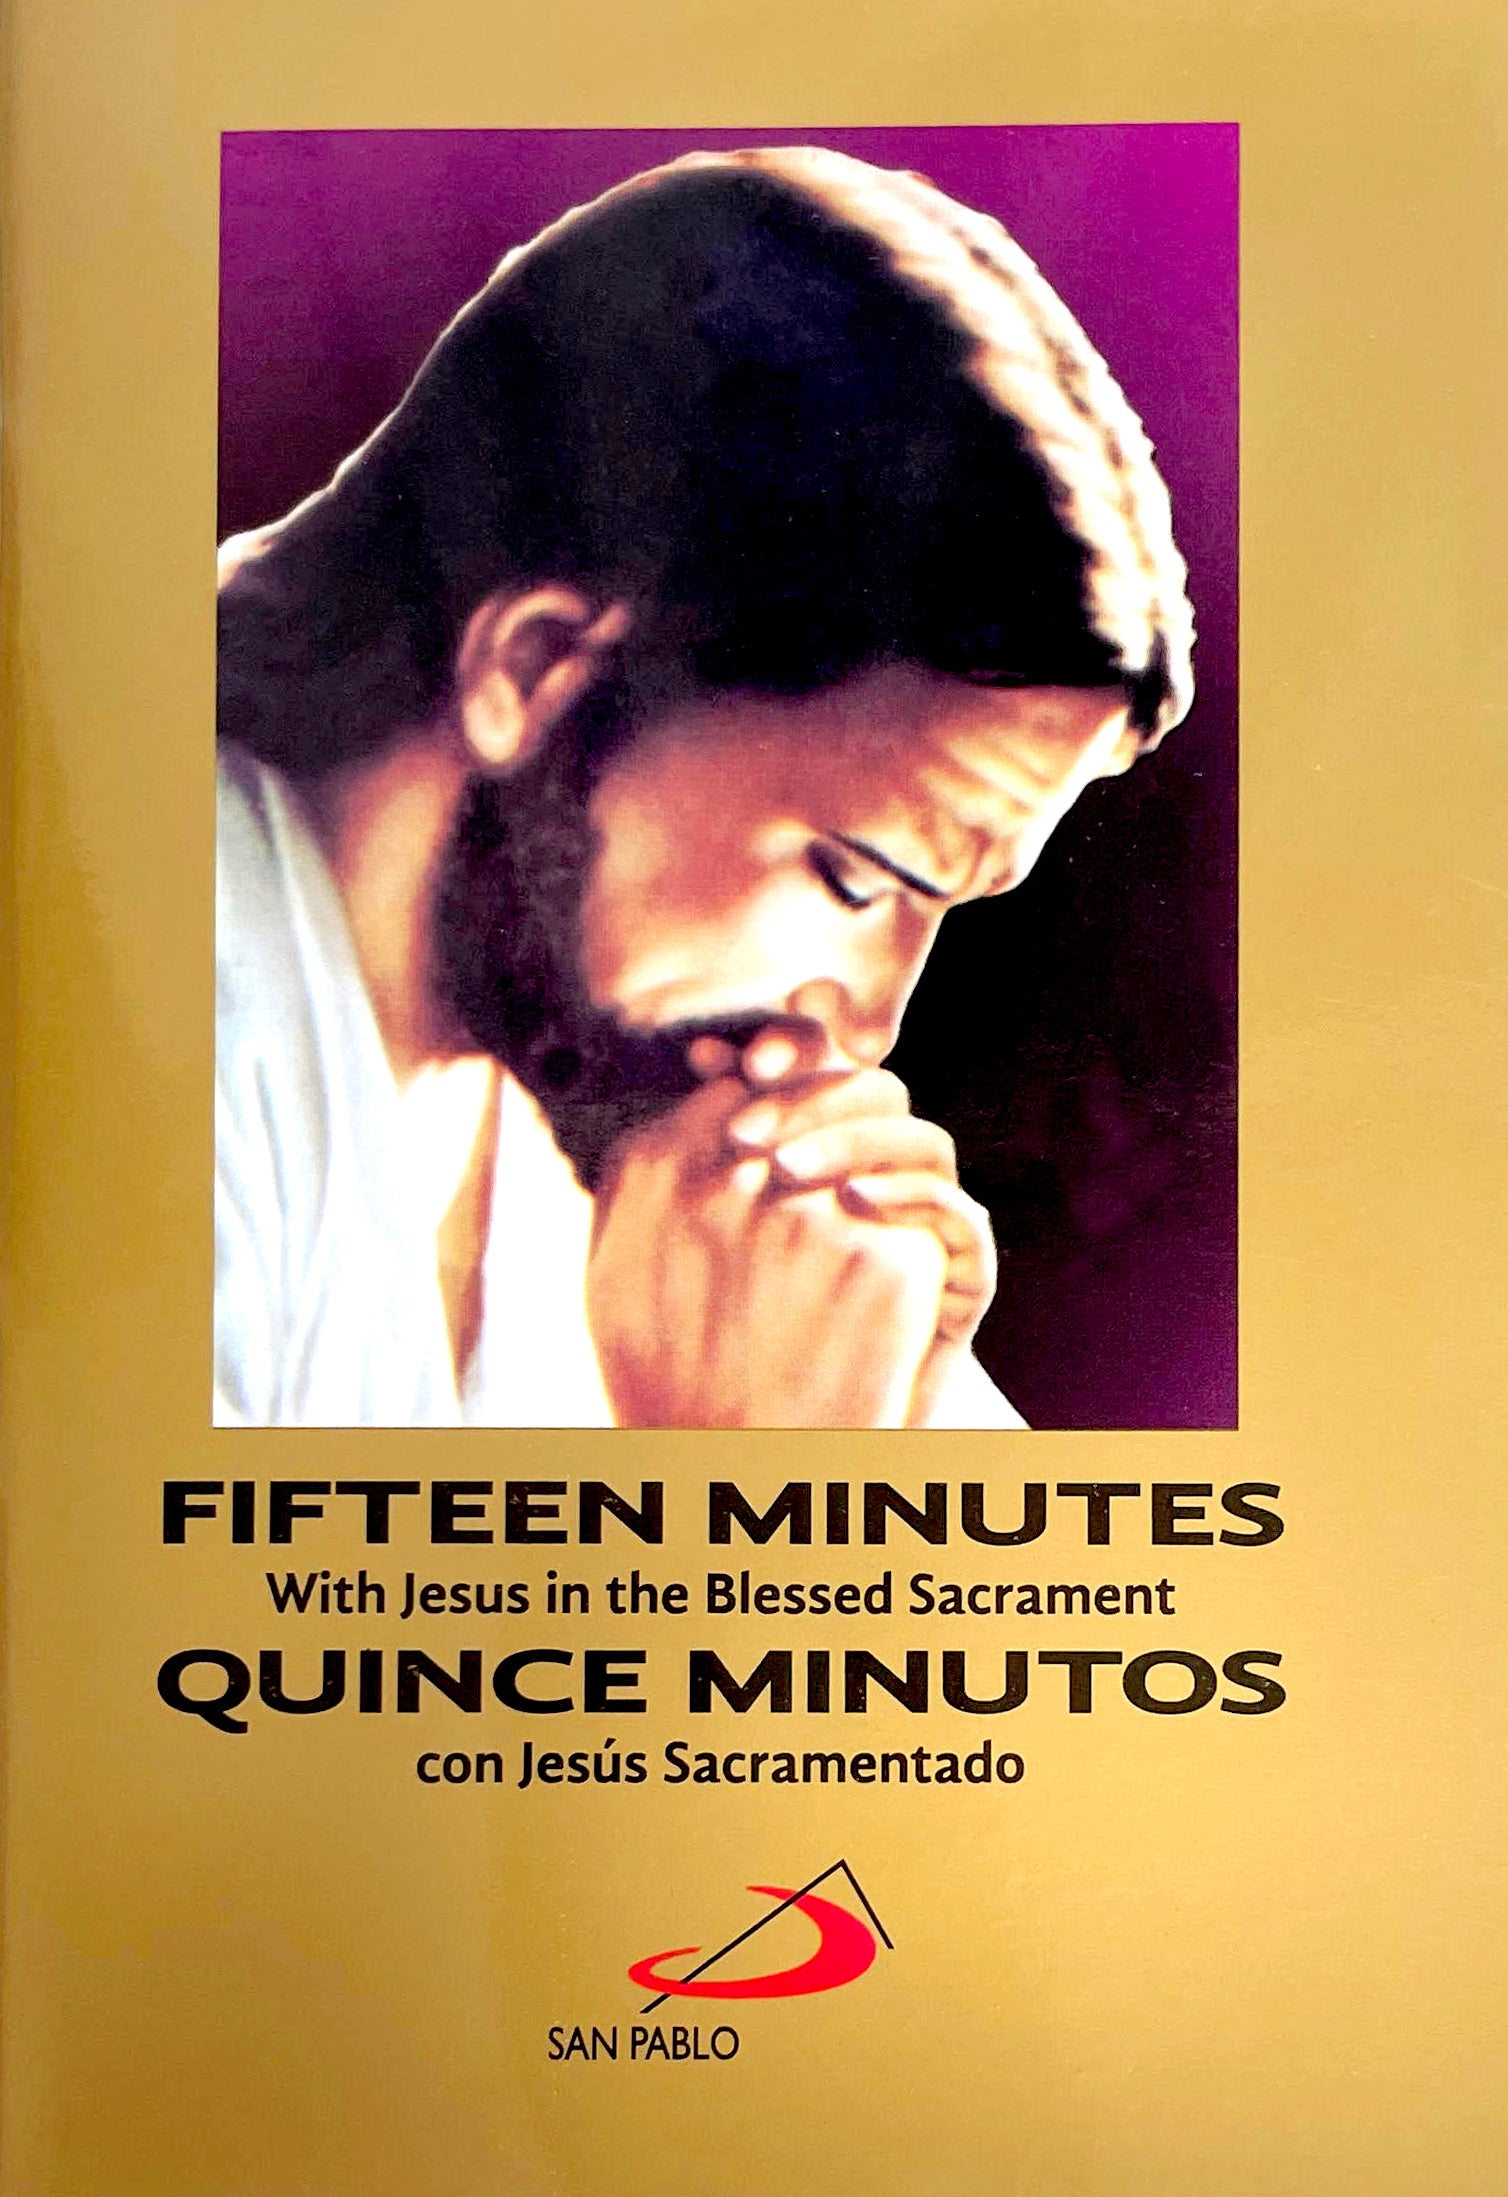 Fifteen Minutes with Jesus in the Blessed Sacrament - Quince Minutos Con Jesus Sacramentado